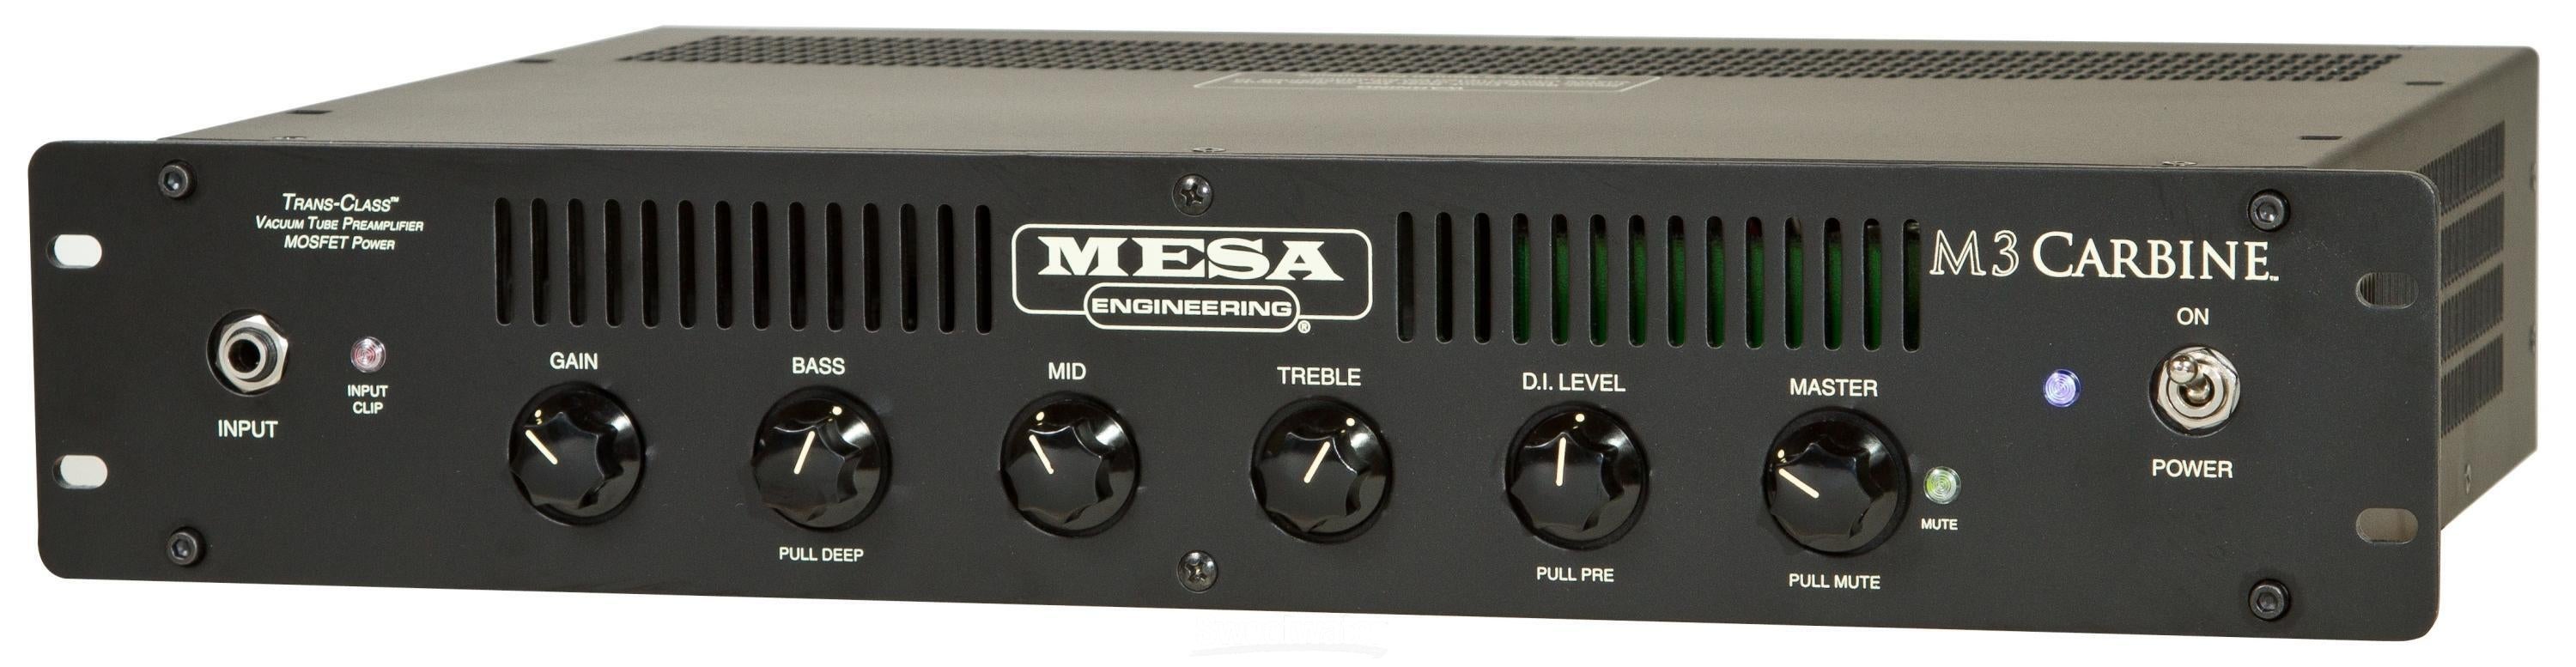 Mesa/Boogie M3 Carbine Bass Head | Sweetwater